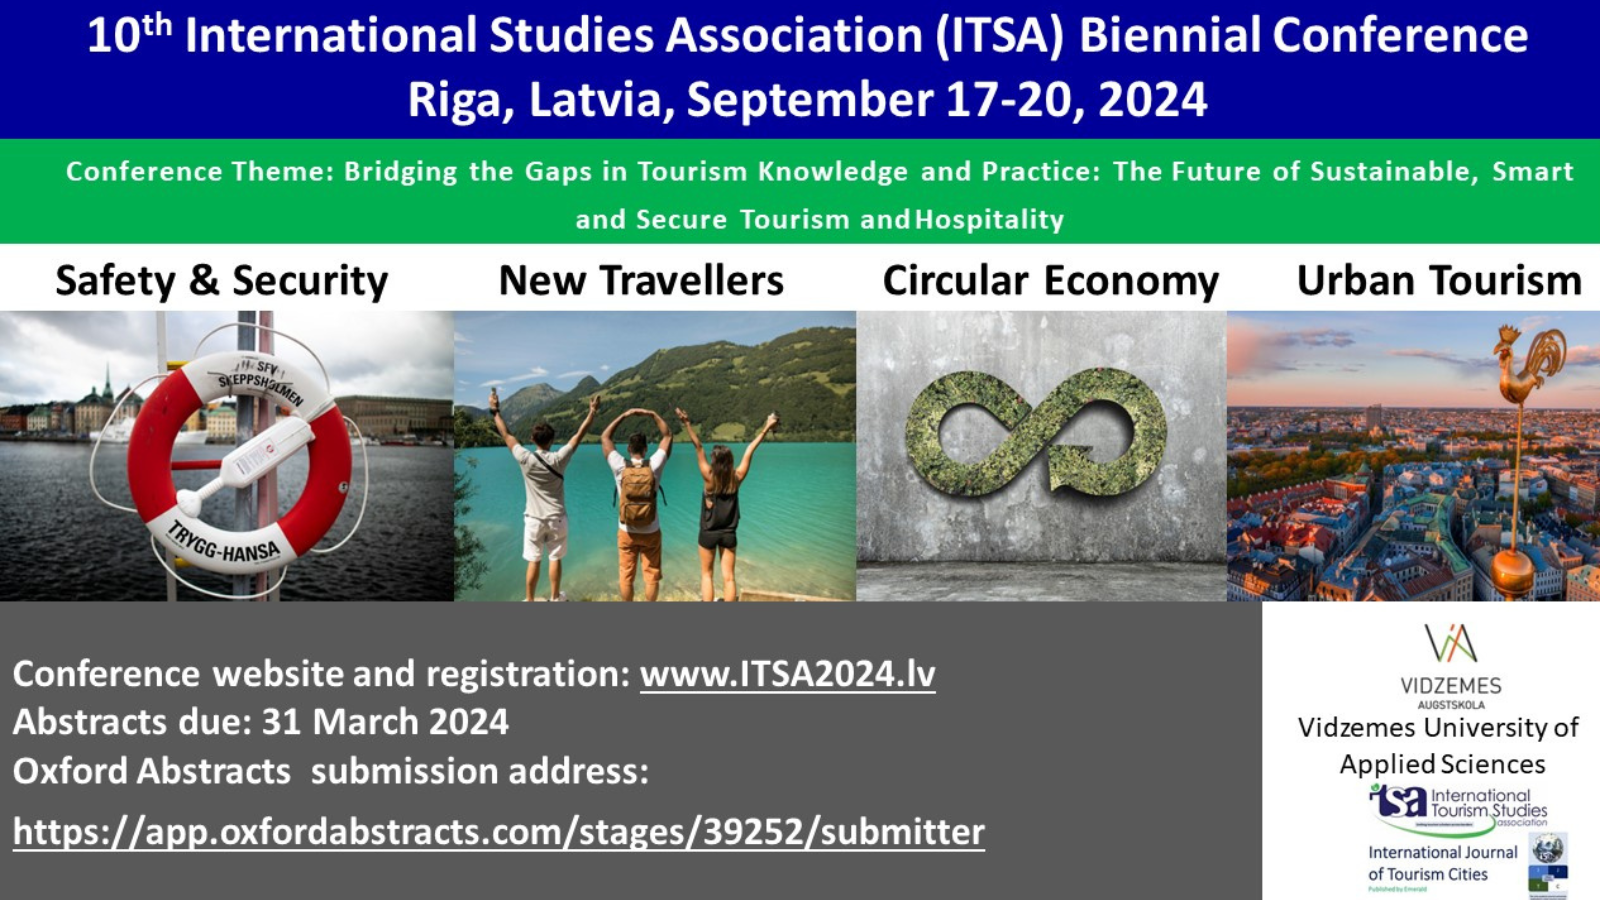 Vidzemes University, the International Tourism Studies Association and the International Journal of Tourism Cities are co-organizing the 10th ITSA Biennial Conference in Riga